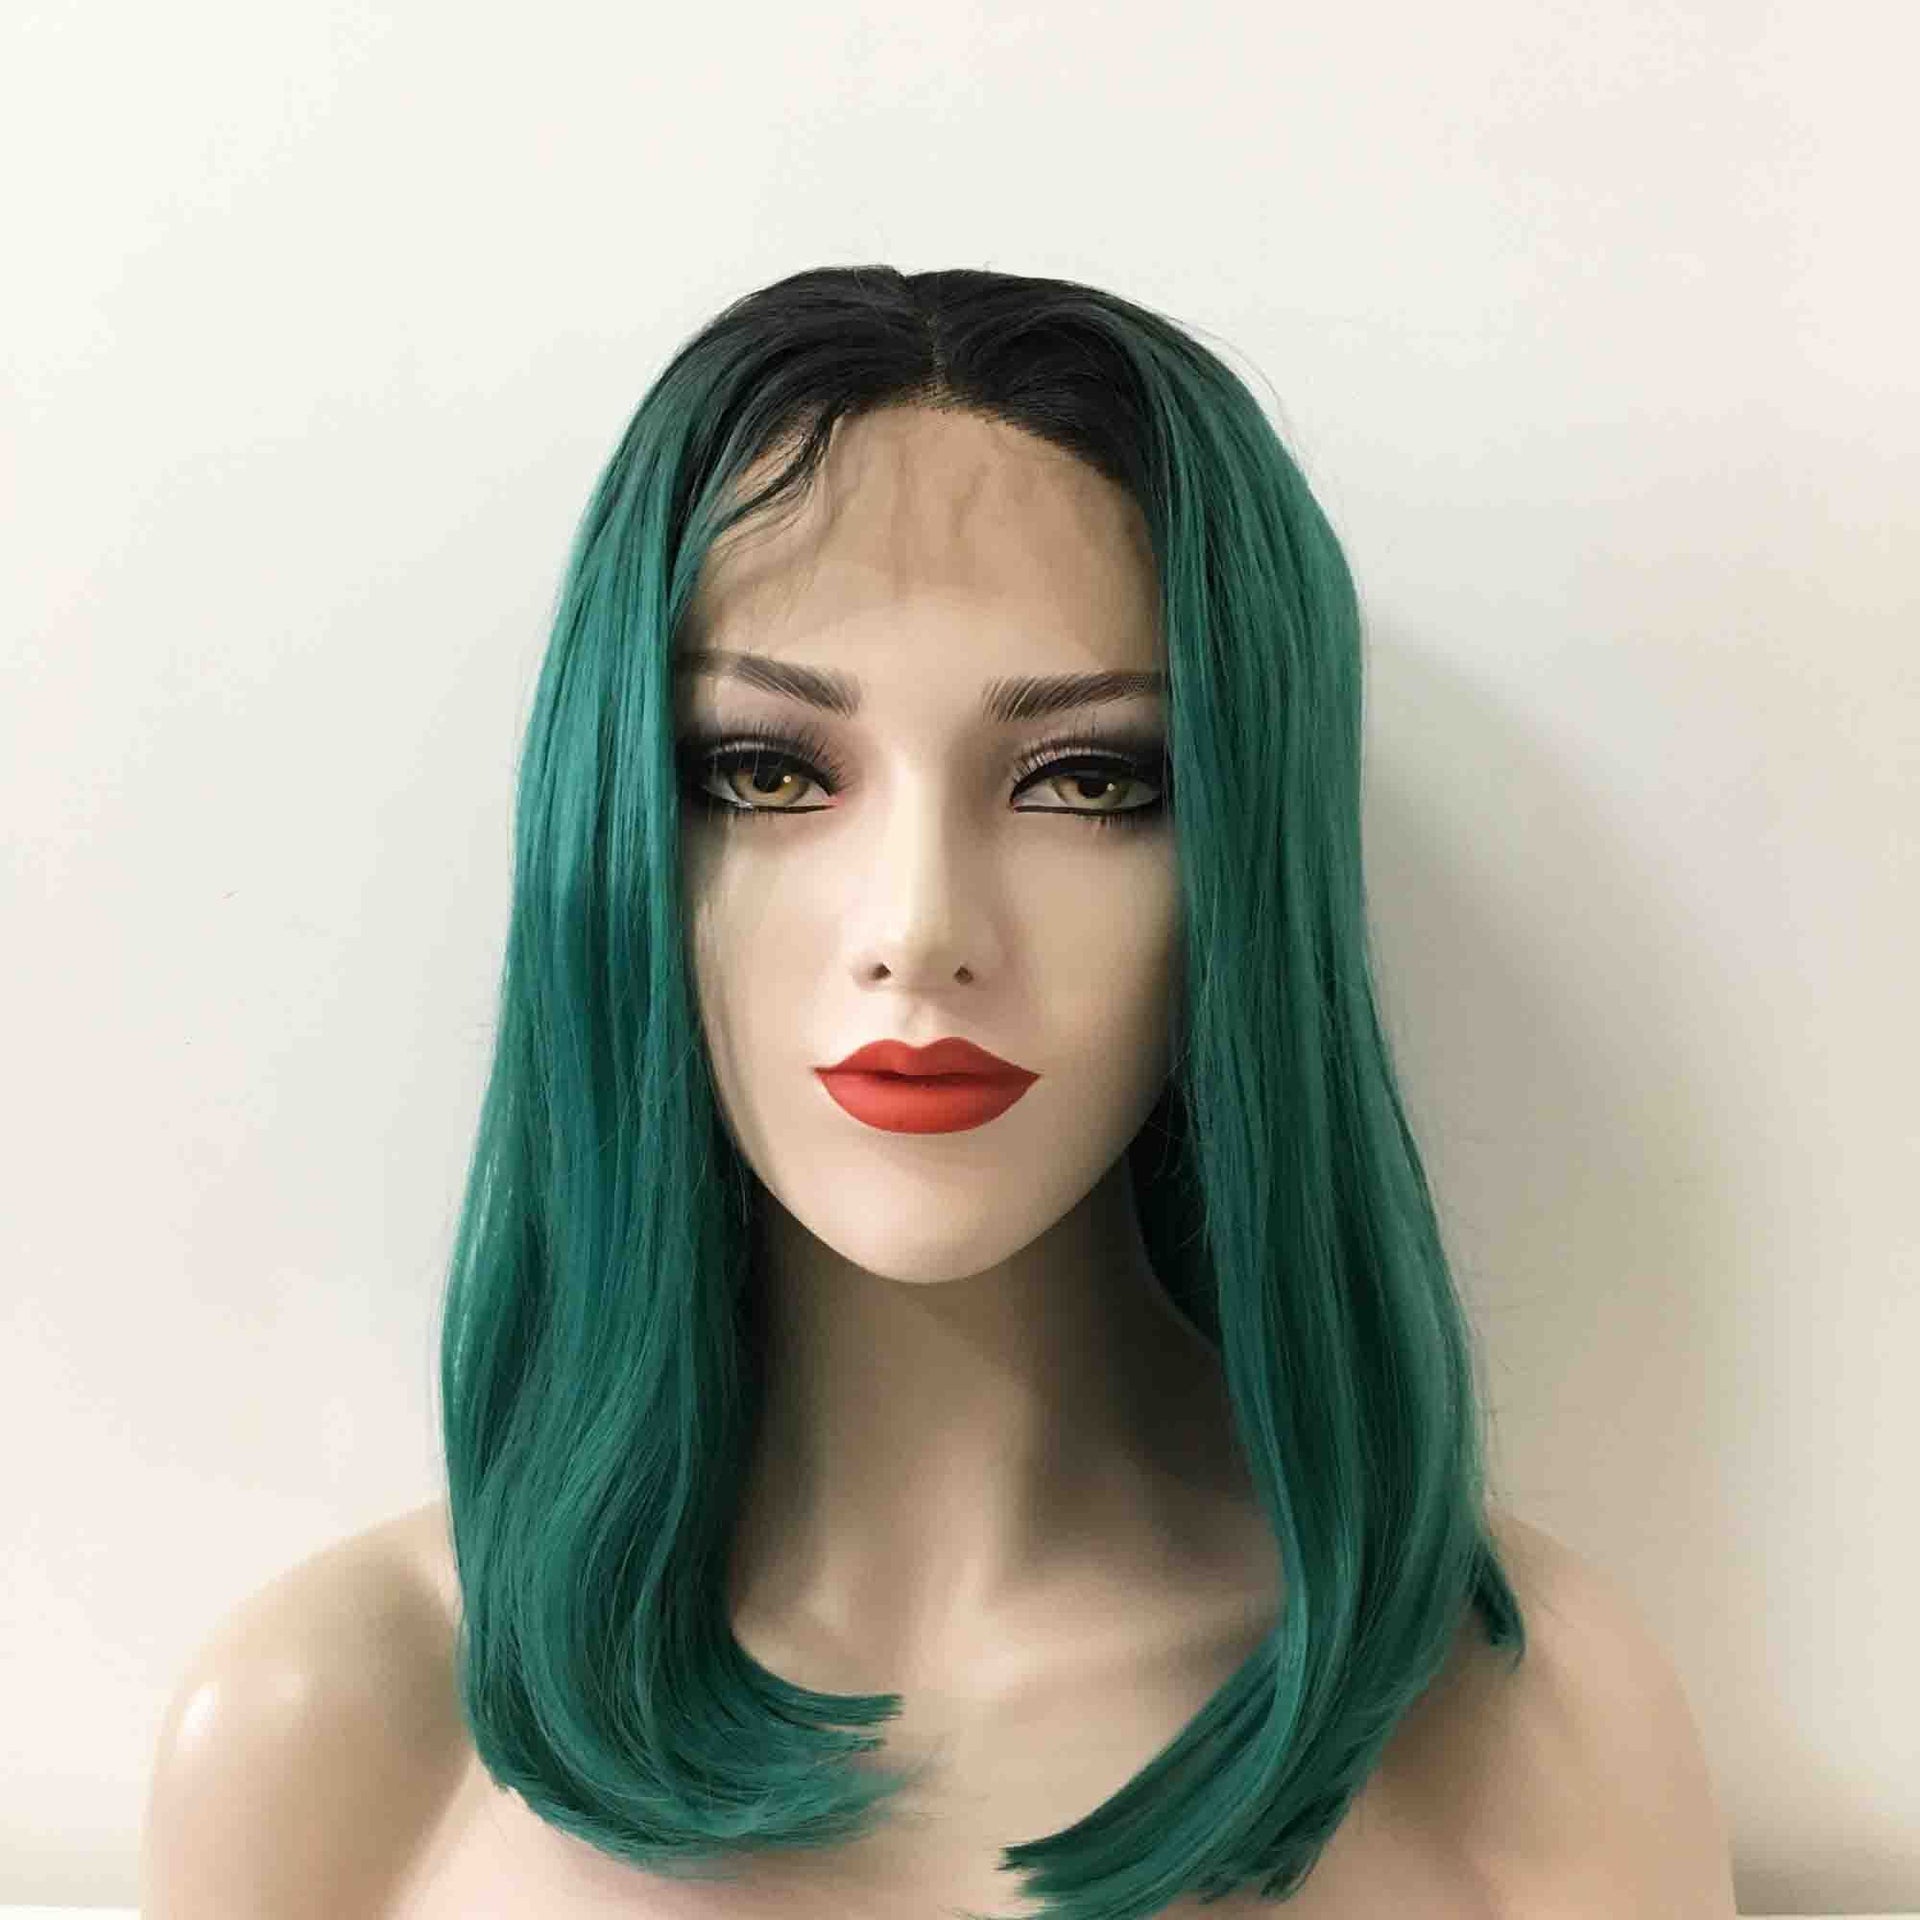 nevermindyrhead Women Green Dark Root Lace Front Medium Length Straight Middle Part Wig